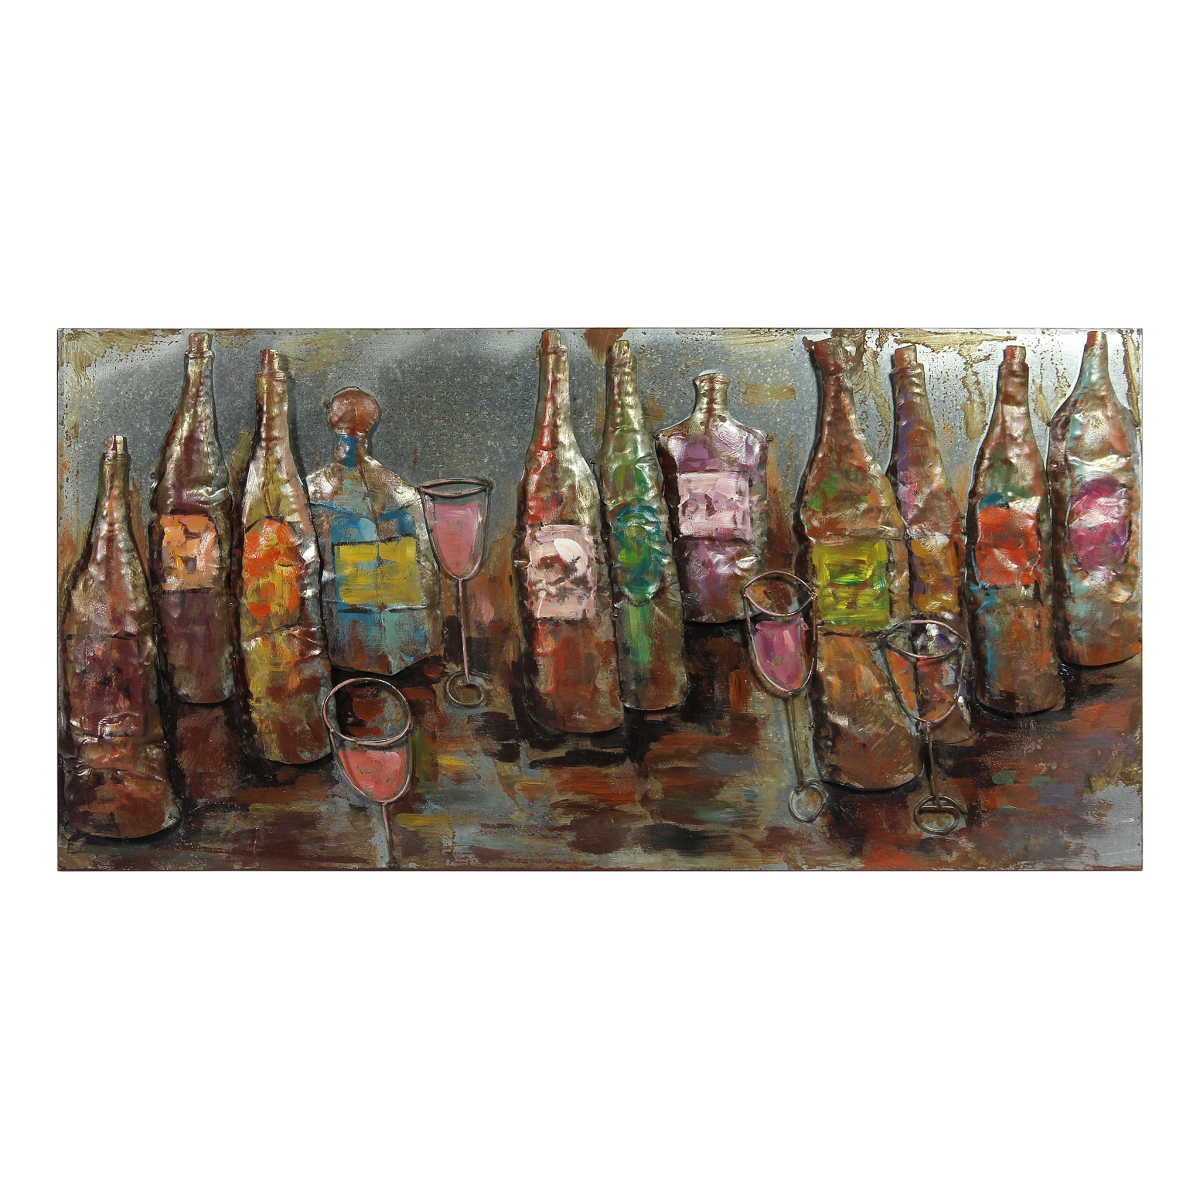 Pmo-120112-2448 Primo Mixed Media Hand Painted Iron Wall Sculpture - 5 O Clock